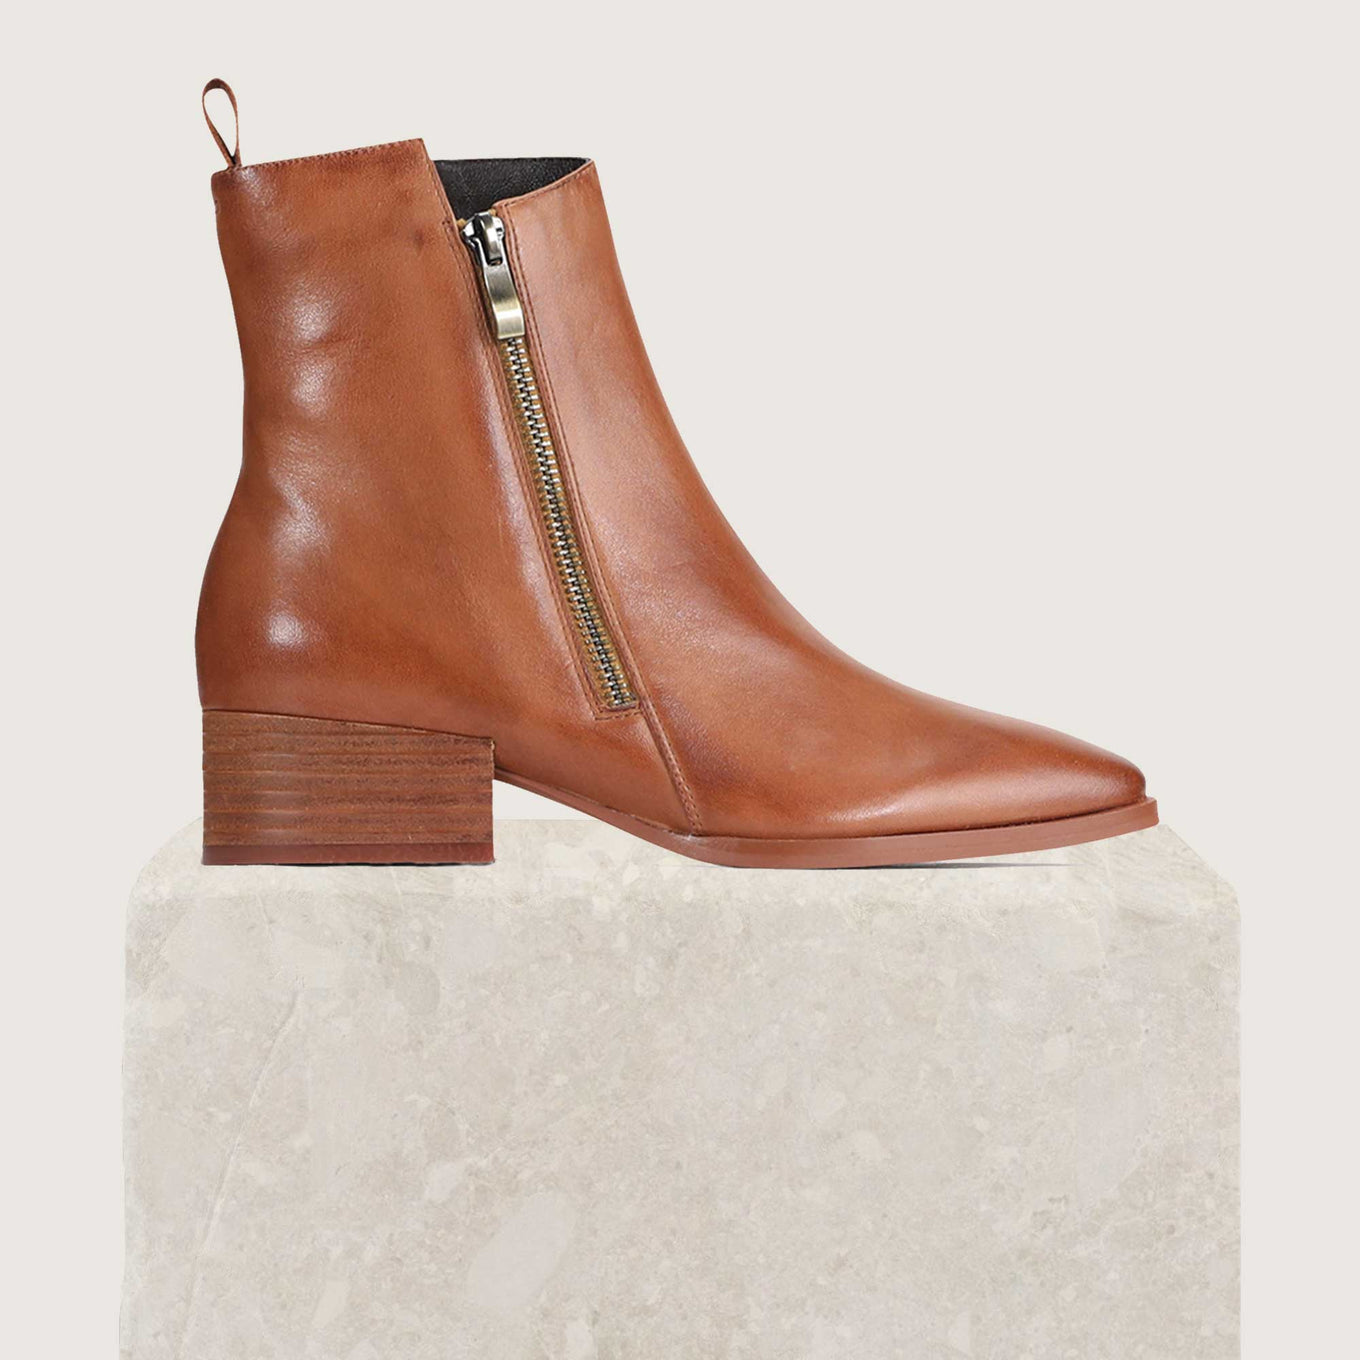 EOS KENDRA BRANDY - Women Boots - Collective Shoes 